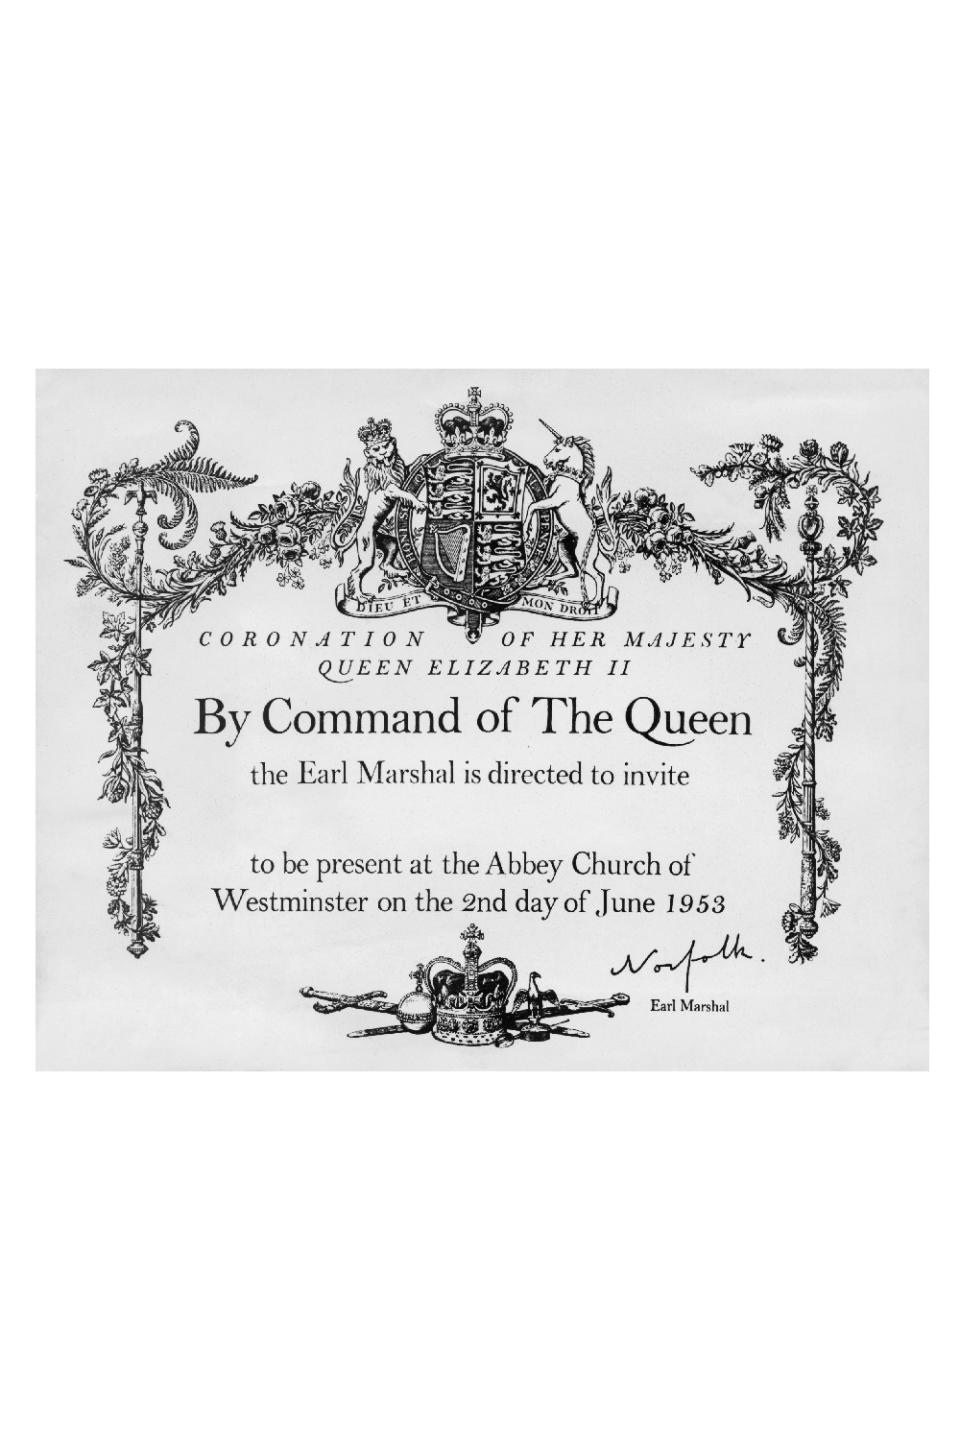 Some special Coronation invitations were given out